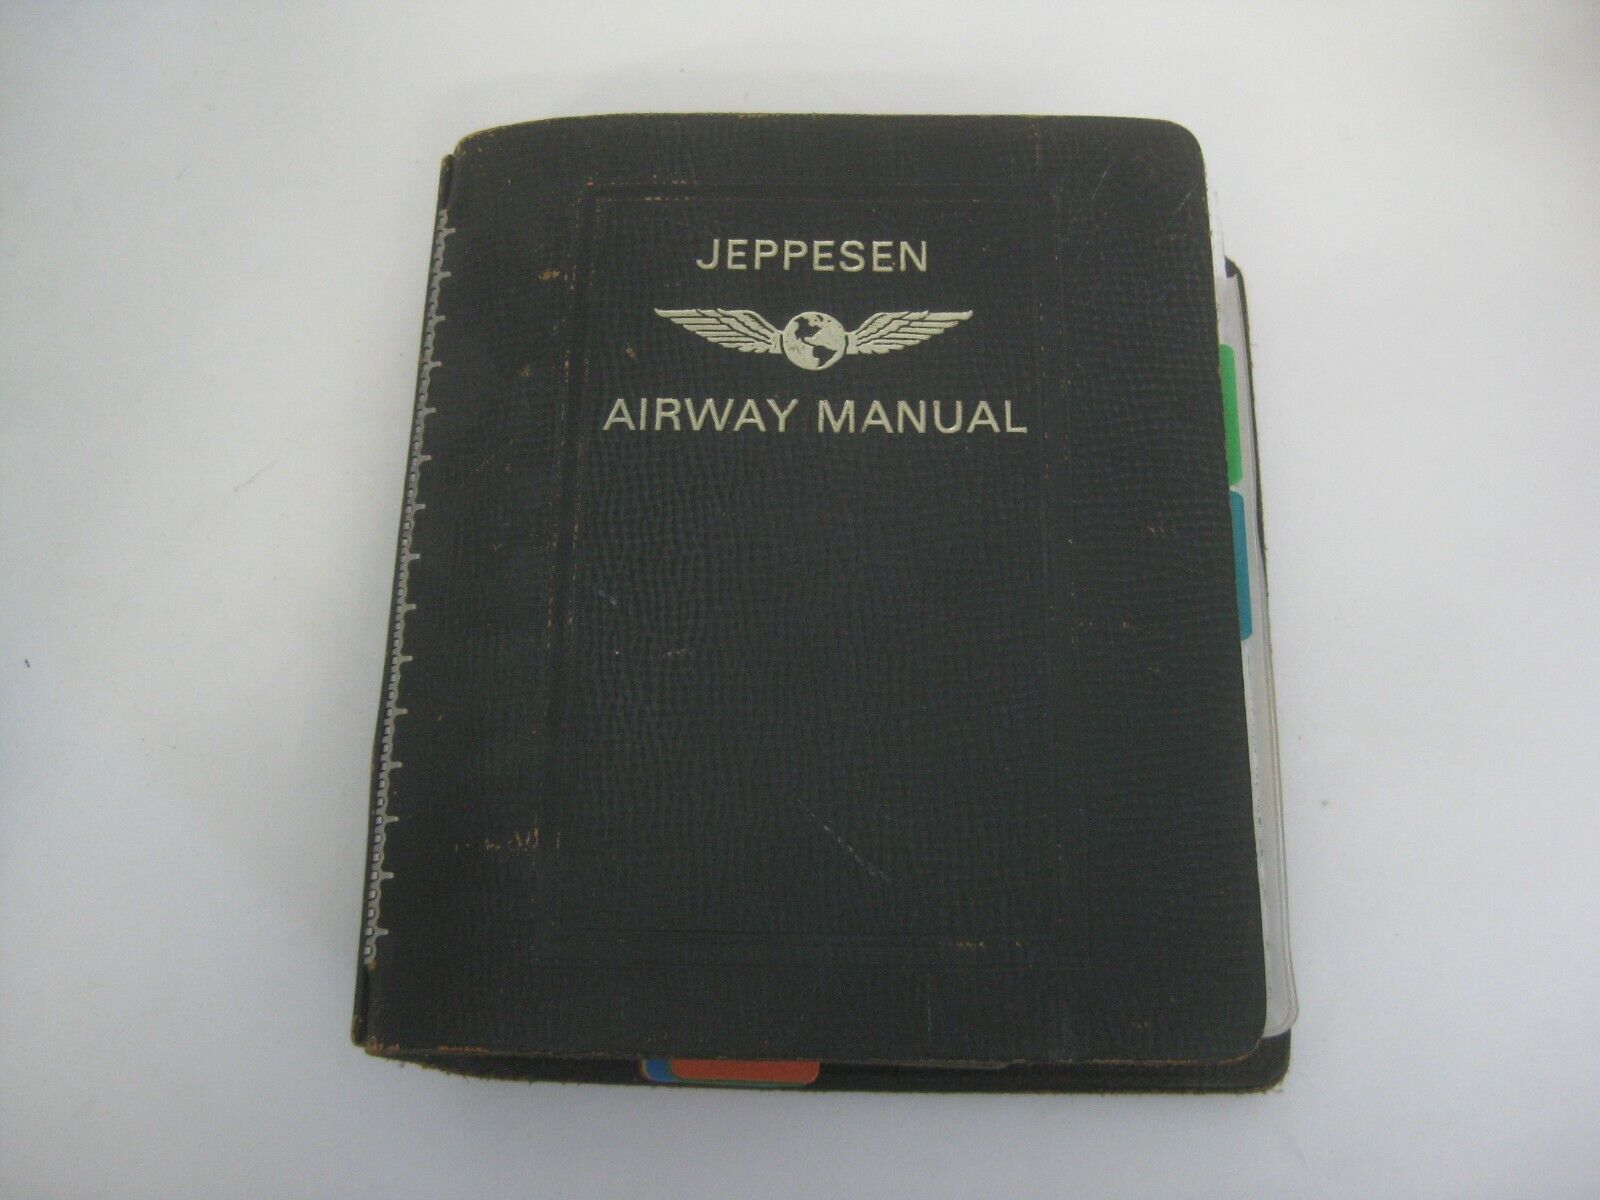 1990\'s-2000\'s JEPPESEN AIRWAY MANUAL MAPS CHARTS SOUTHERN CALIFORNIA LOS ANGELES